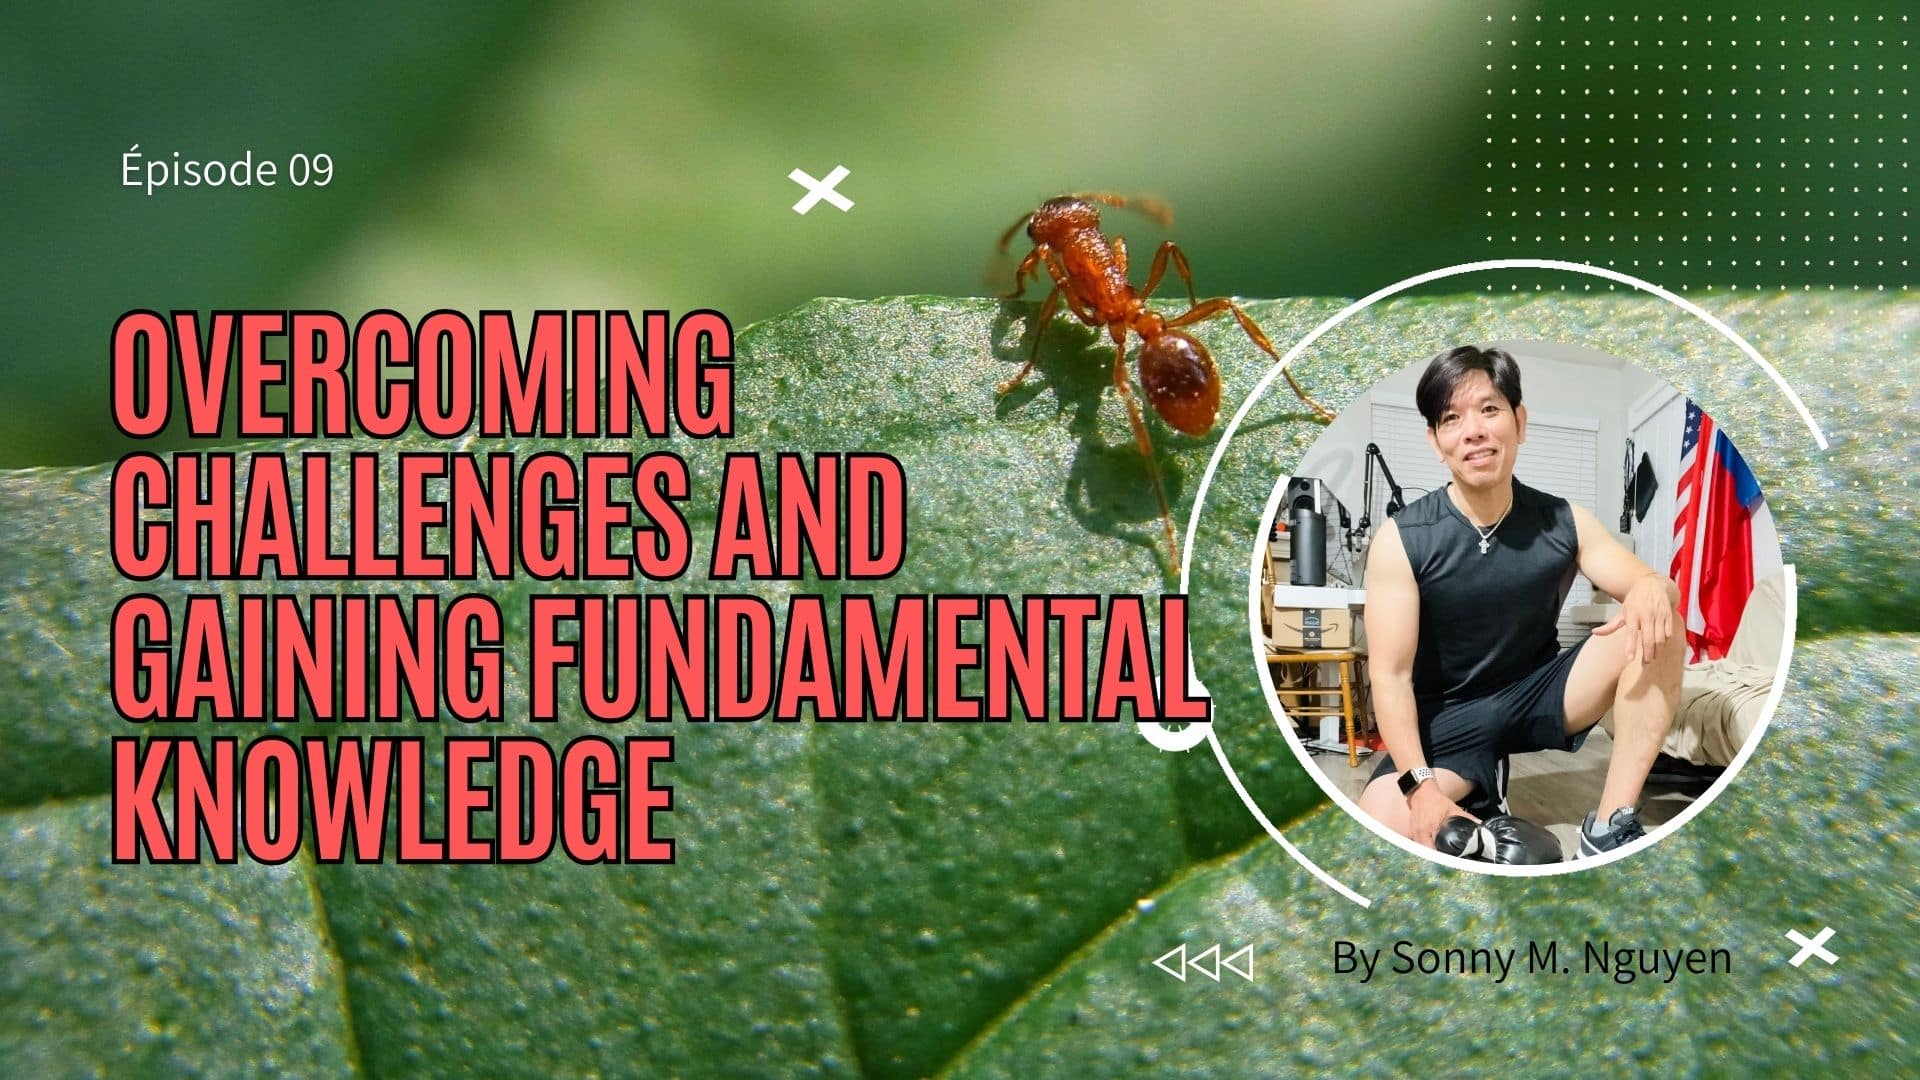 Épisode 09 | Overcoming Challenges and Gaining Fundamental Knowledge